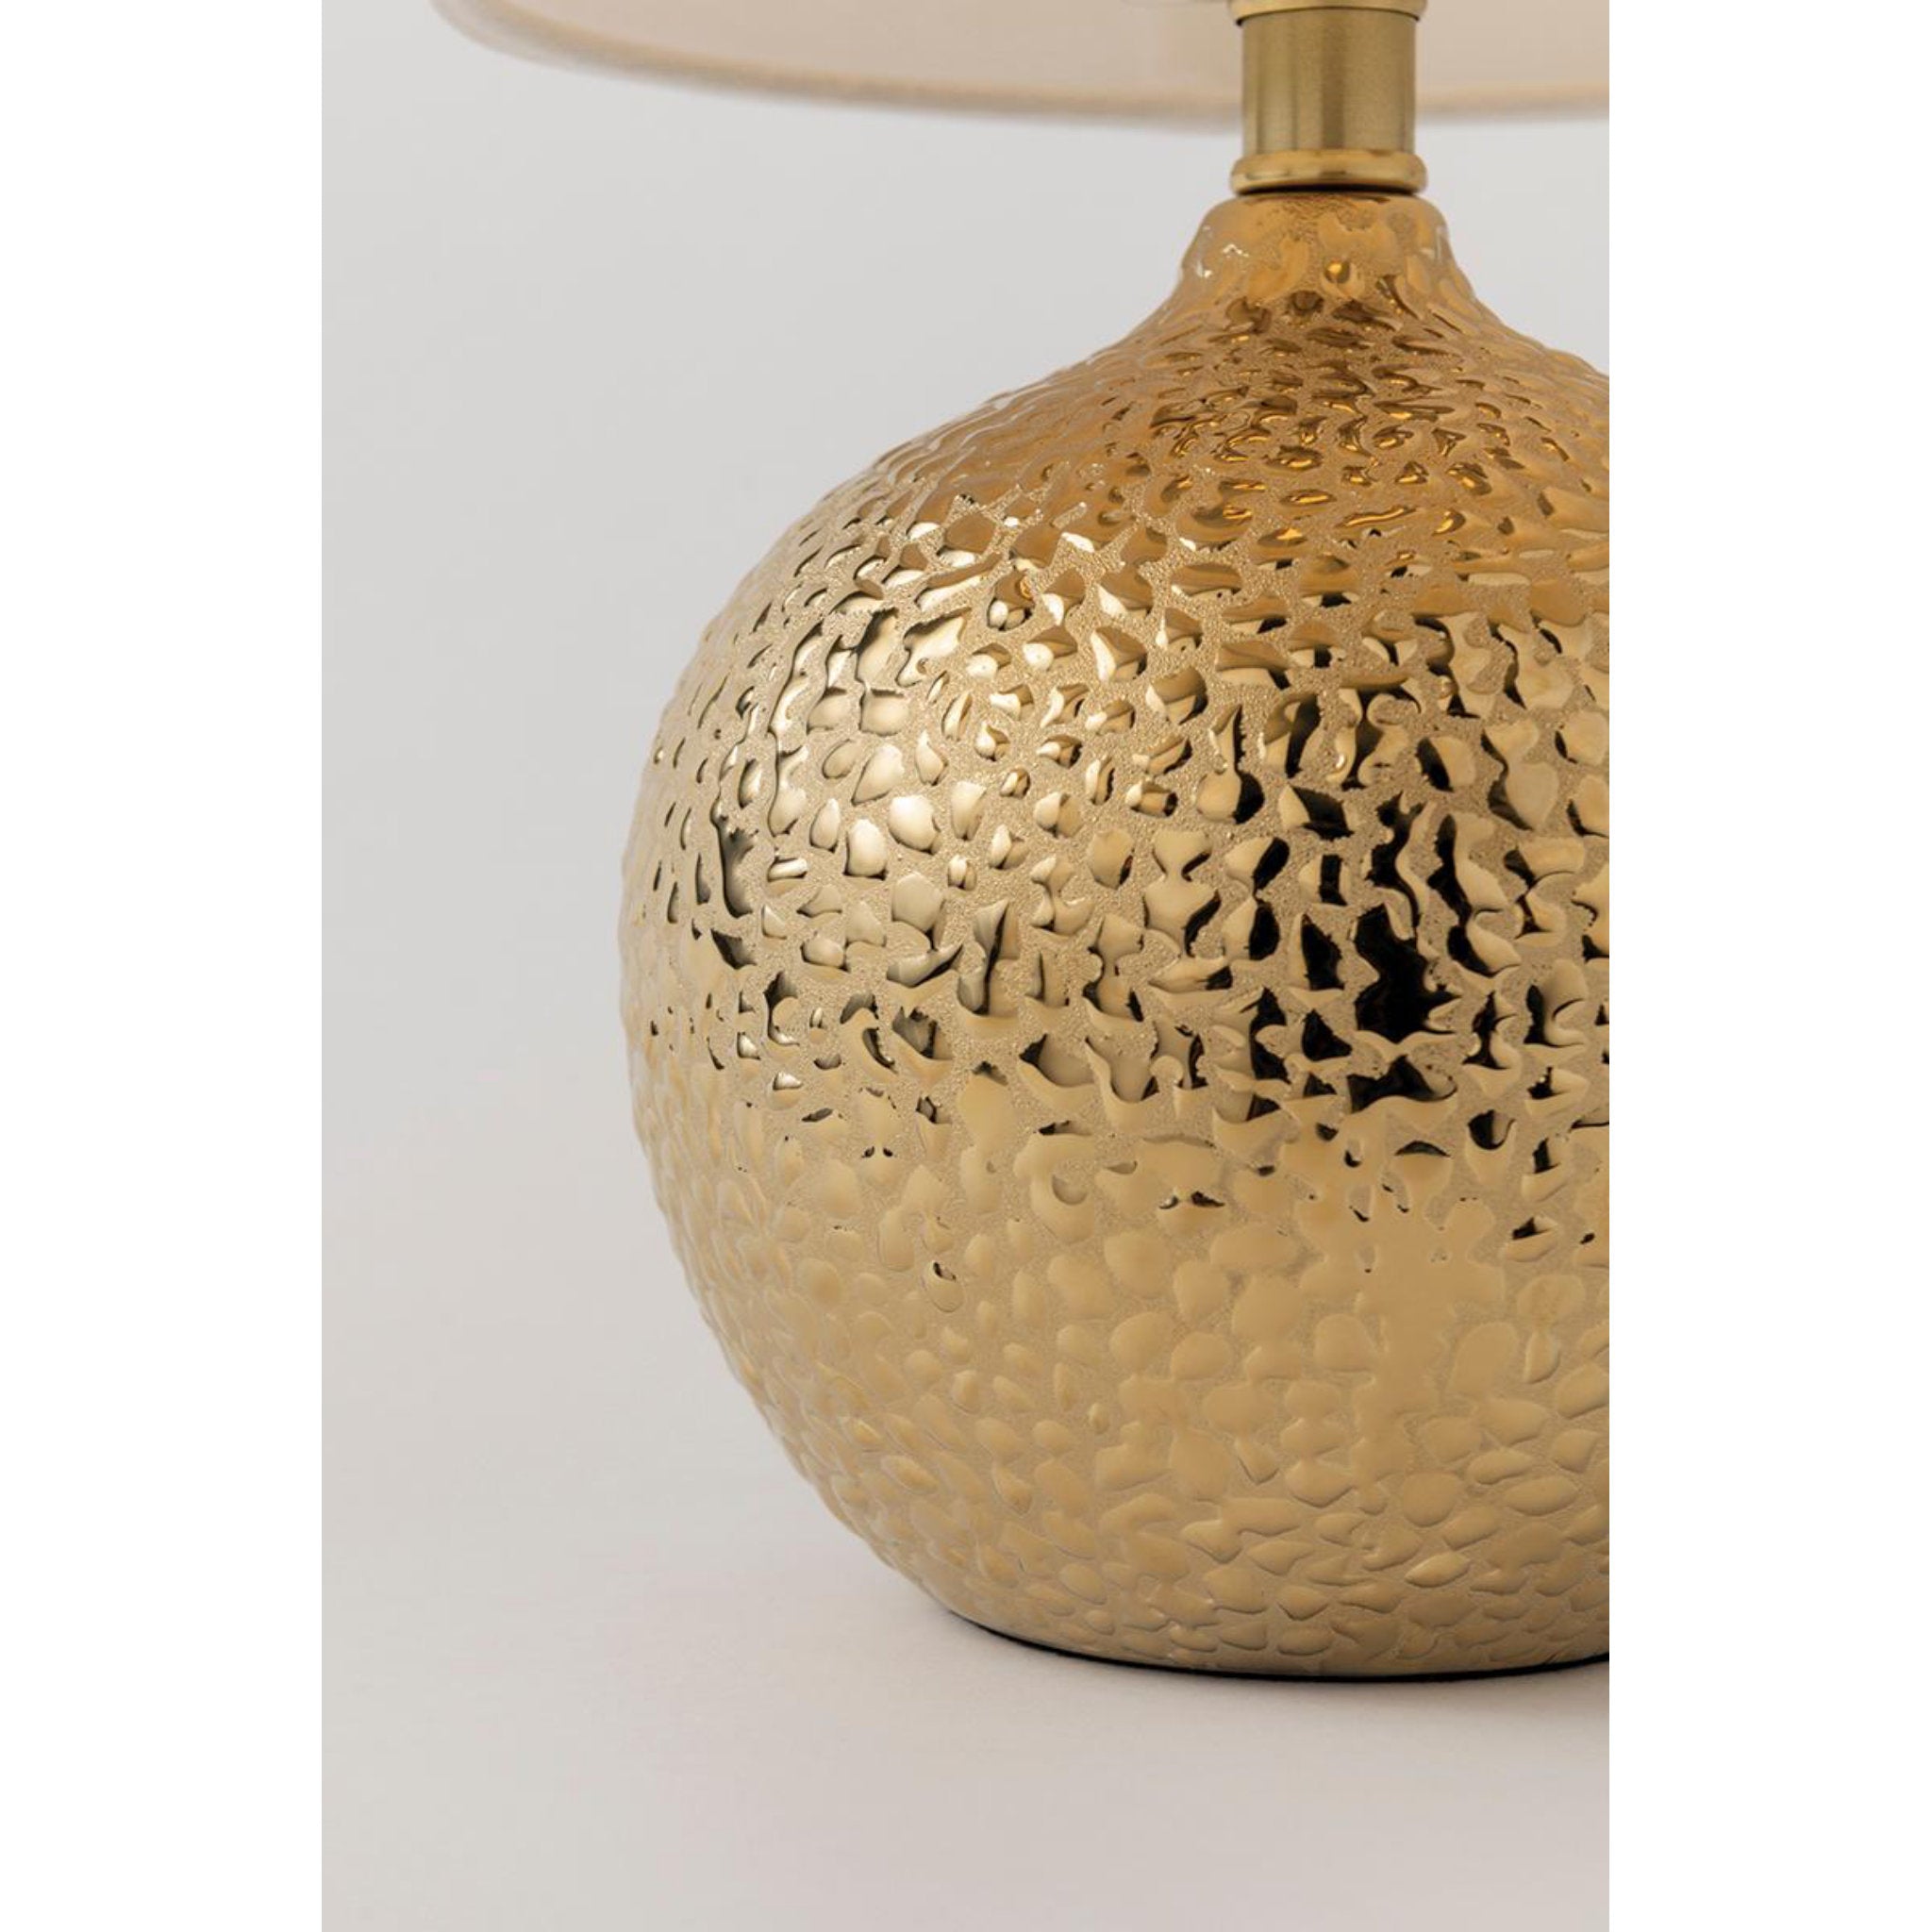 Heather 1-Light Table Lamp in Gold